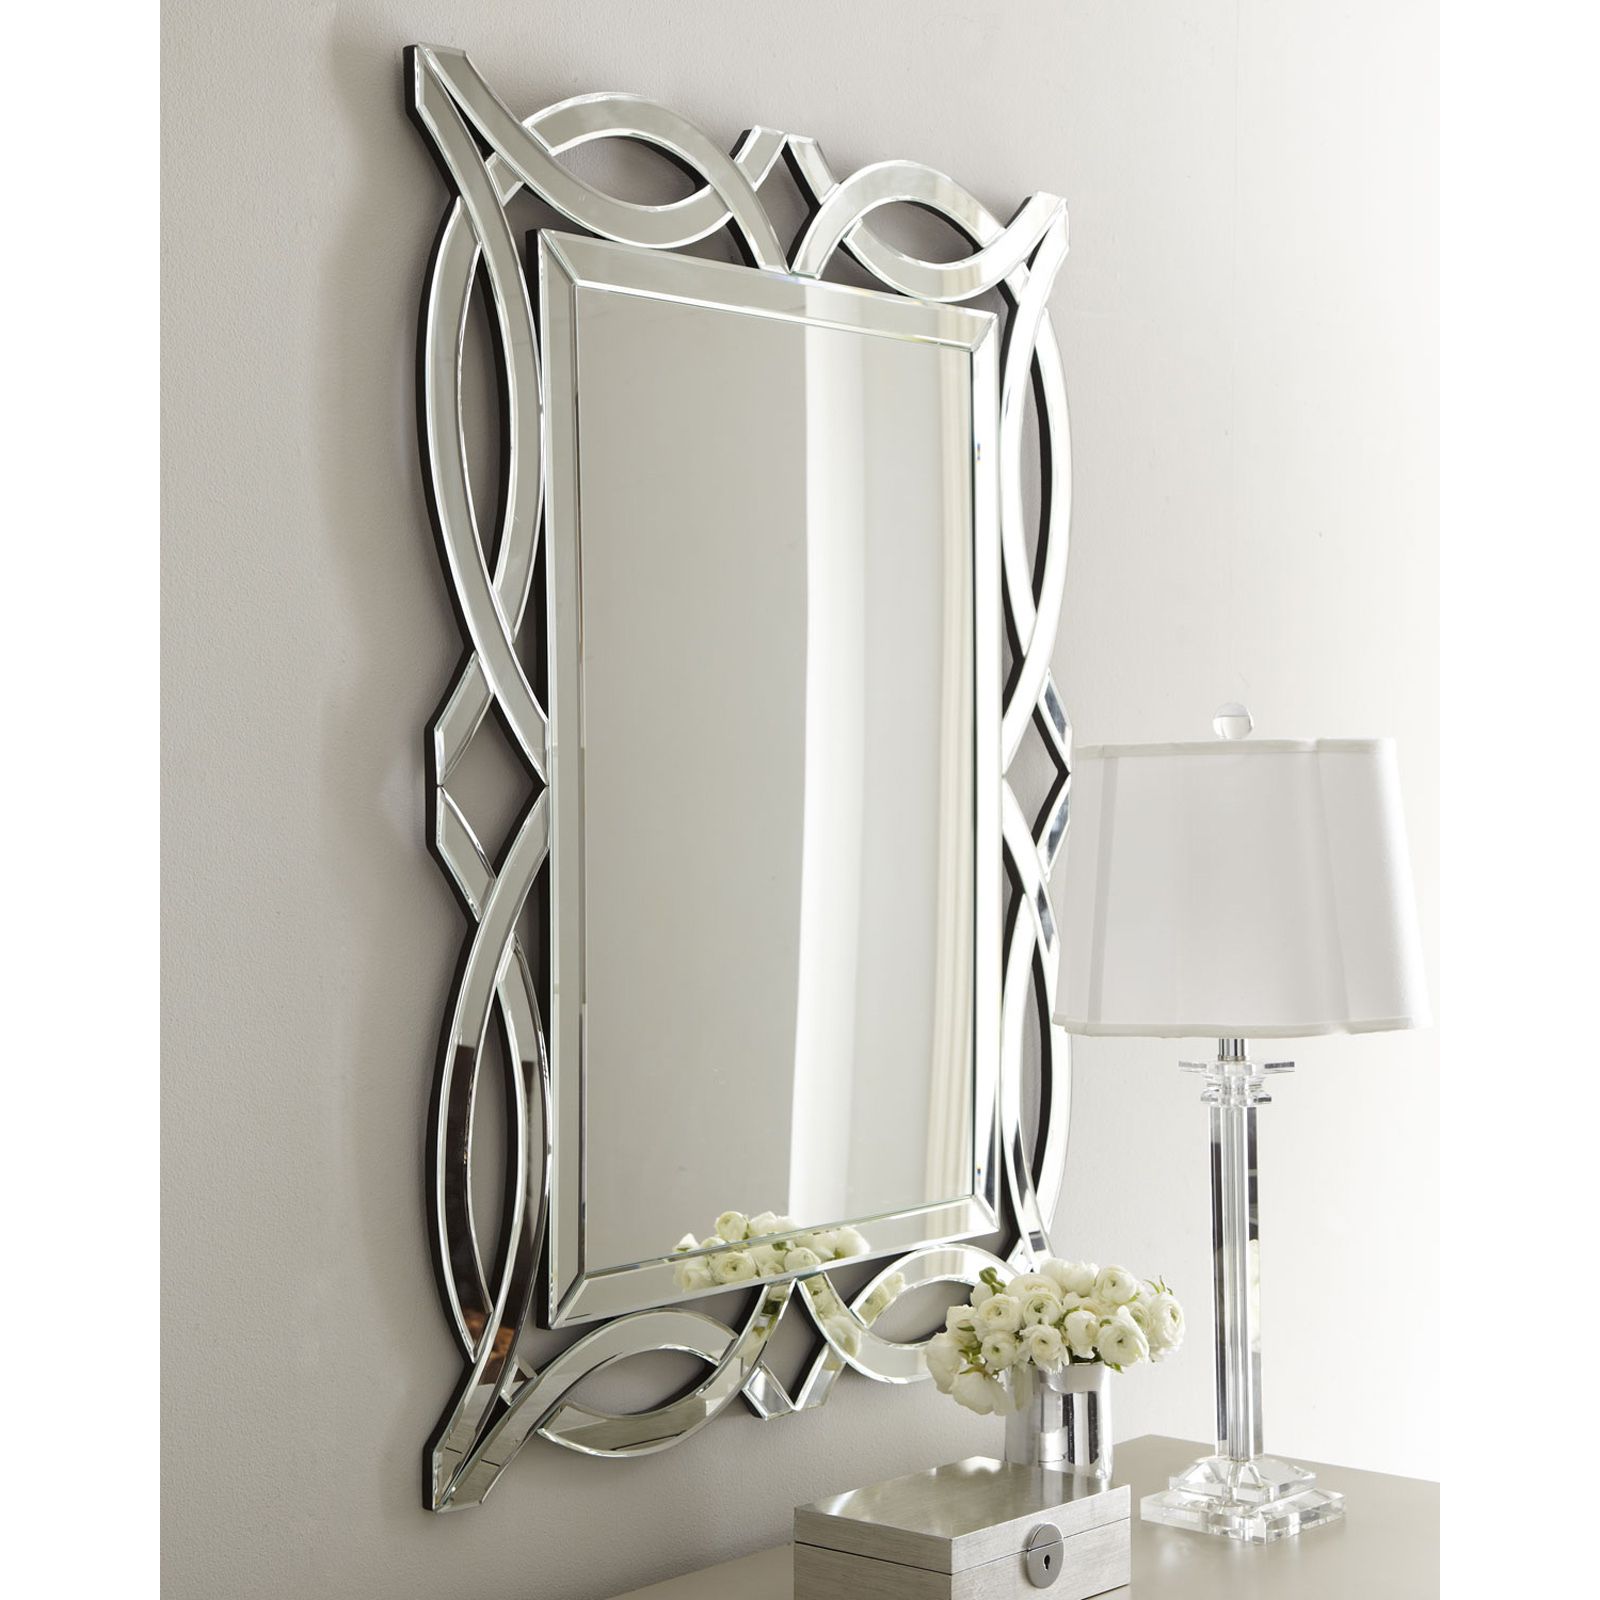 Afina Modern Luxe Wall Mirror – 32w X 42h In. – Mirrors At Hayneedle Regarding Sartain Modern & Contemporary Wall Mirrors (Photo 5 of 15)